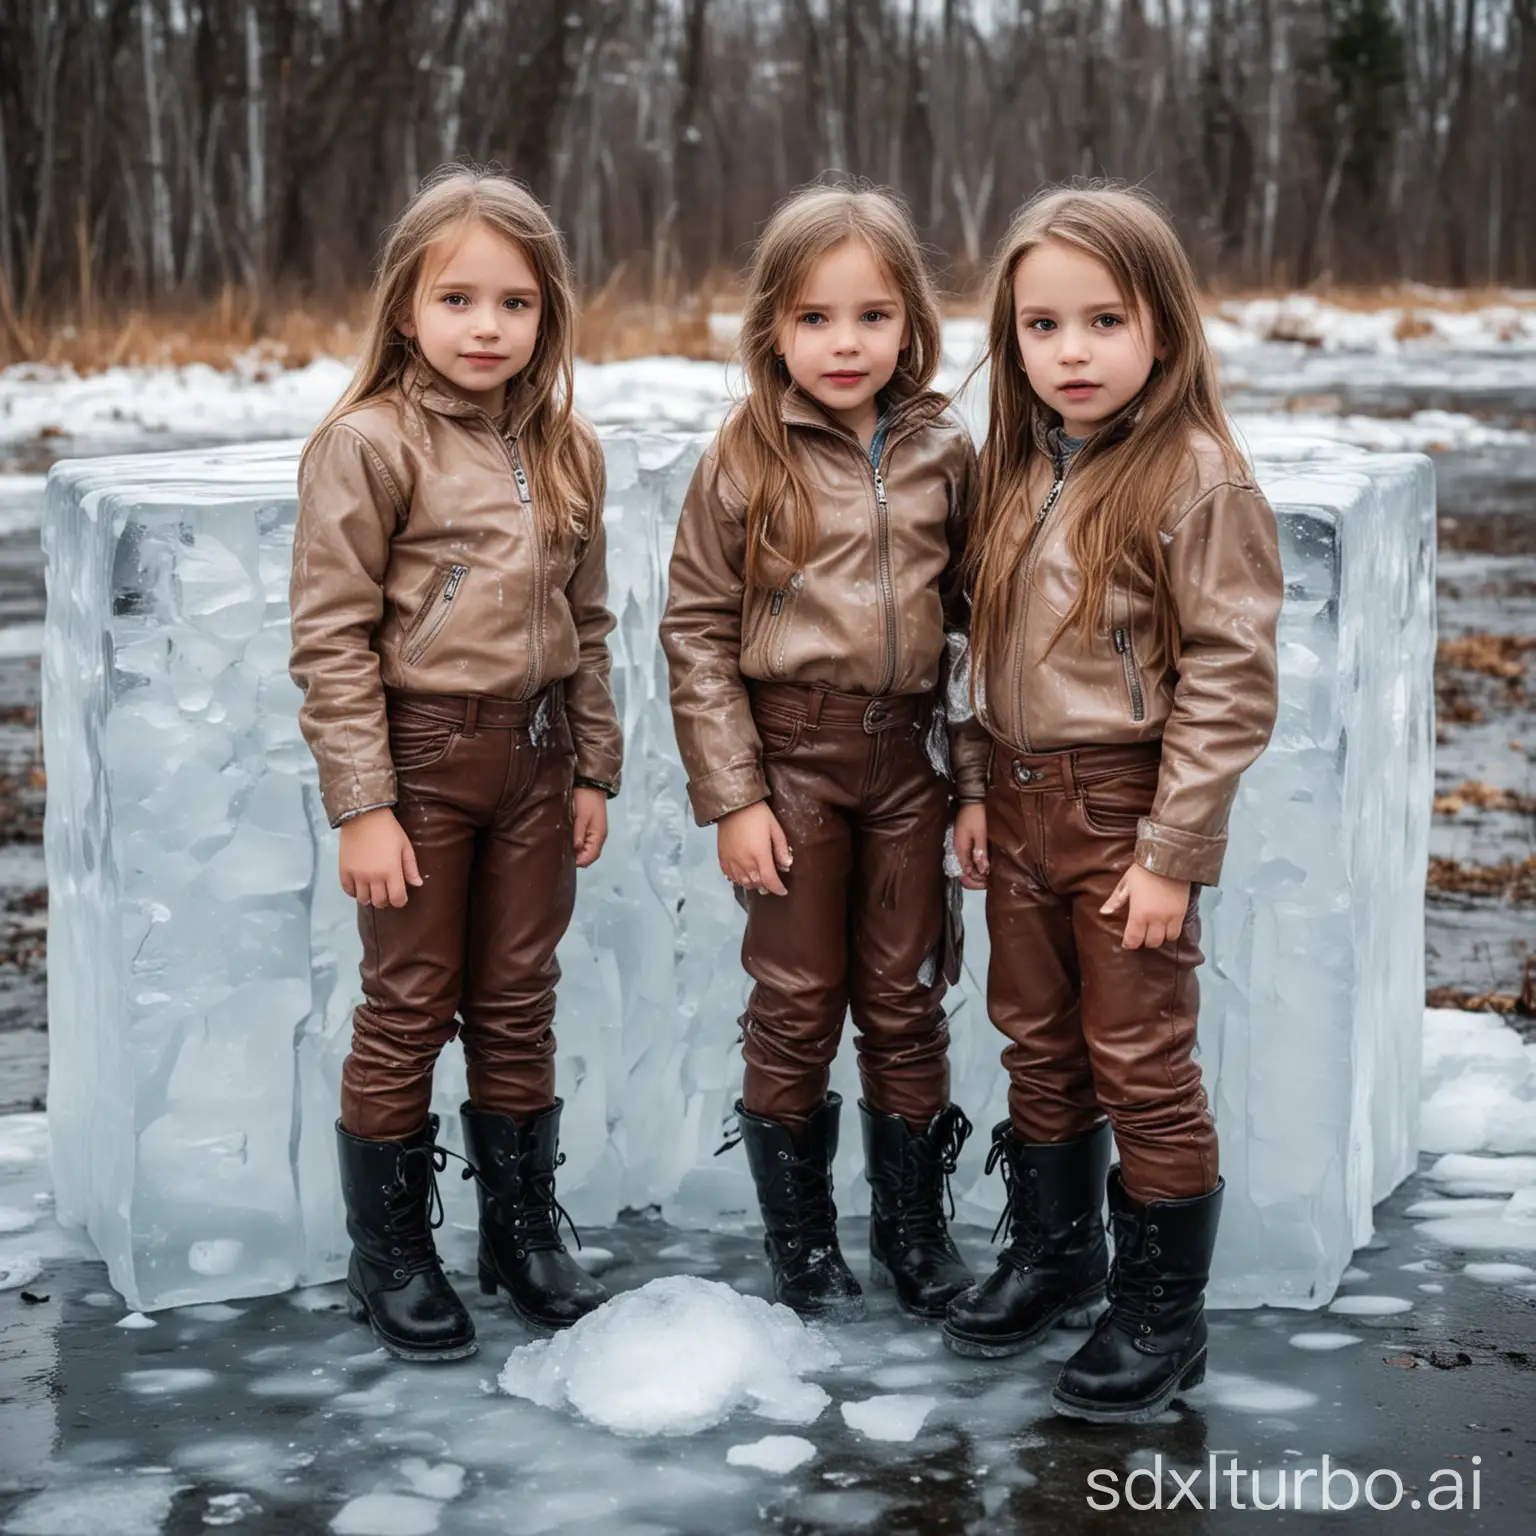 children girls in leather pants frozen in a block of ice